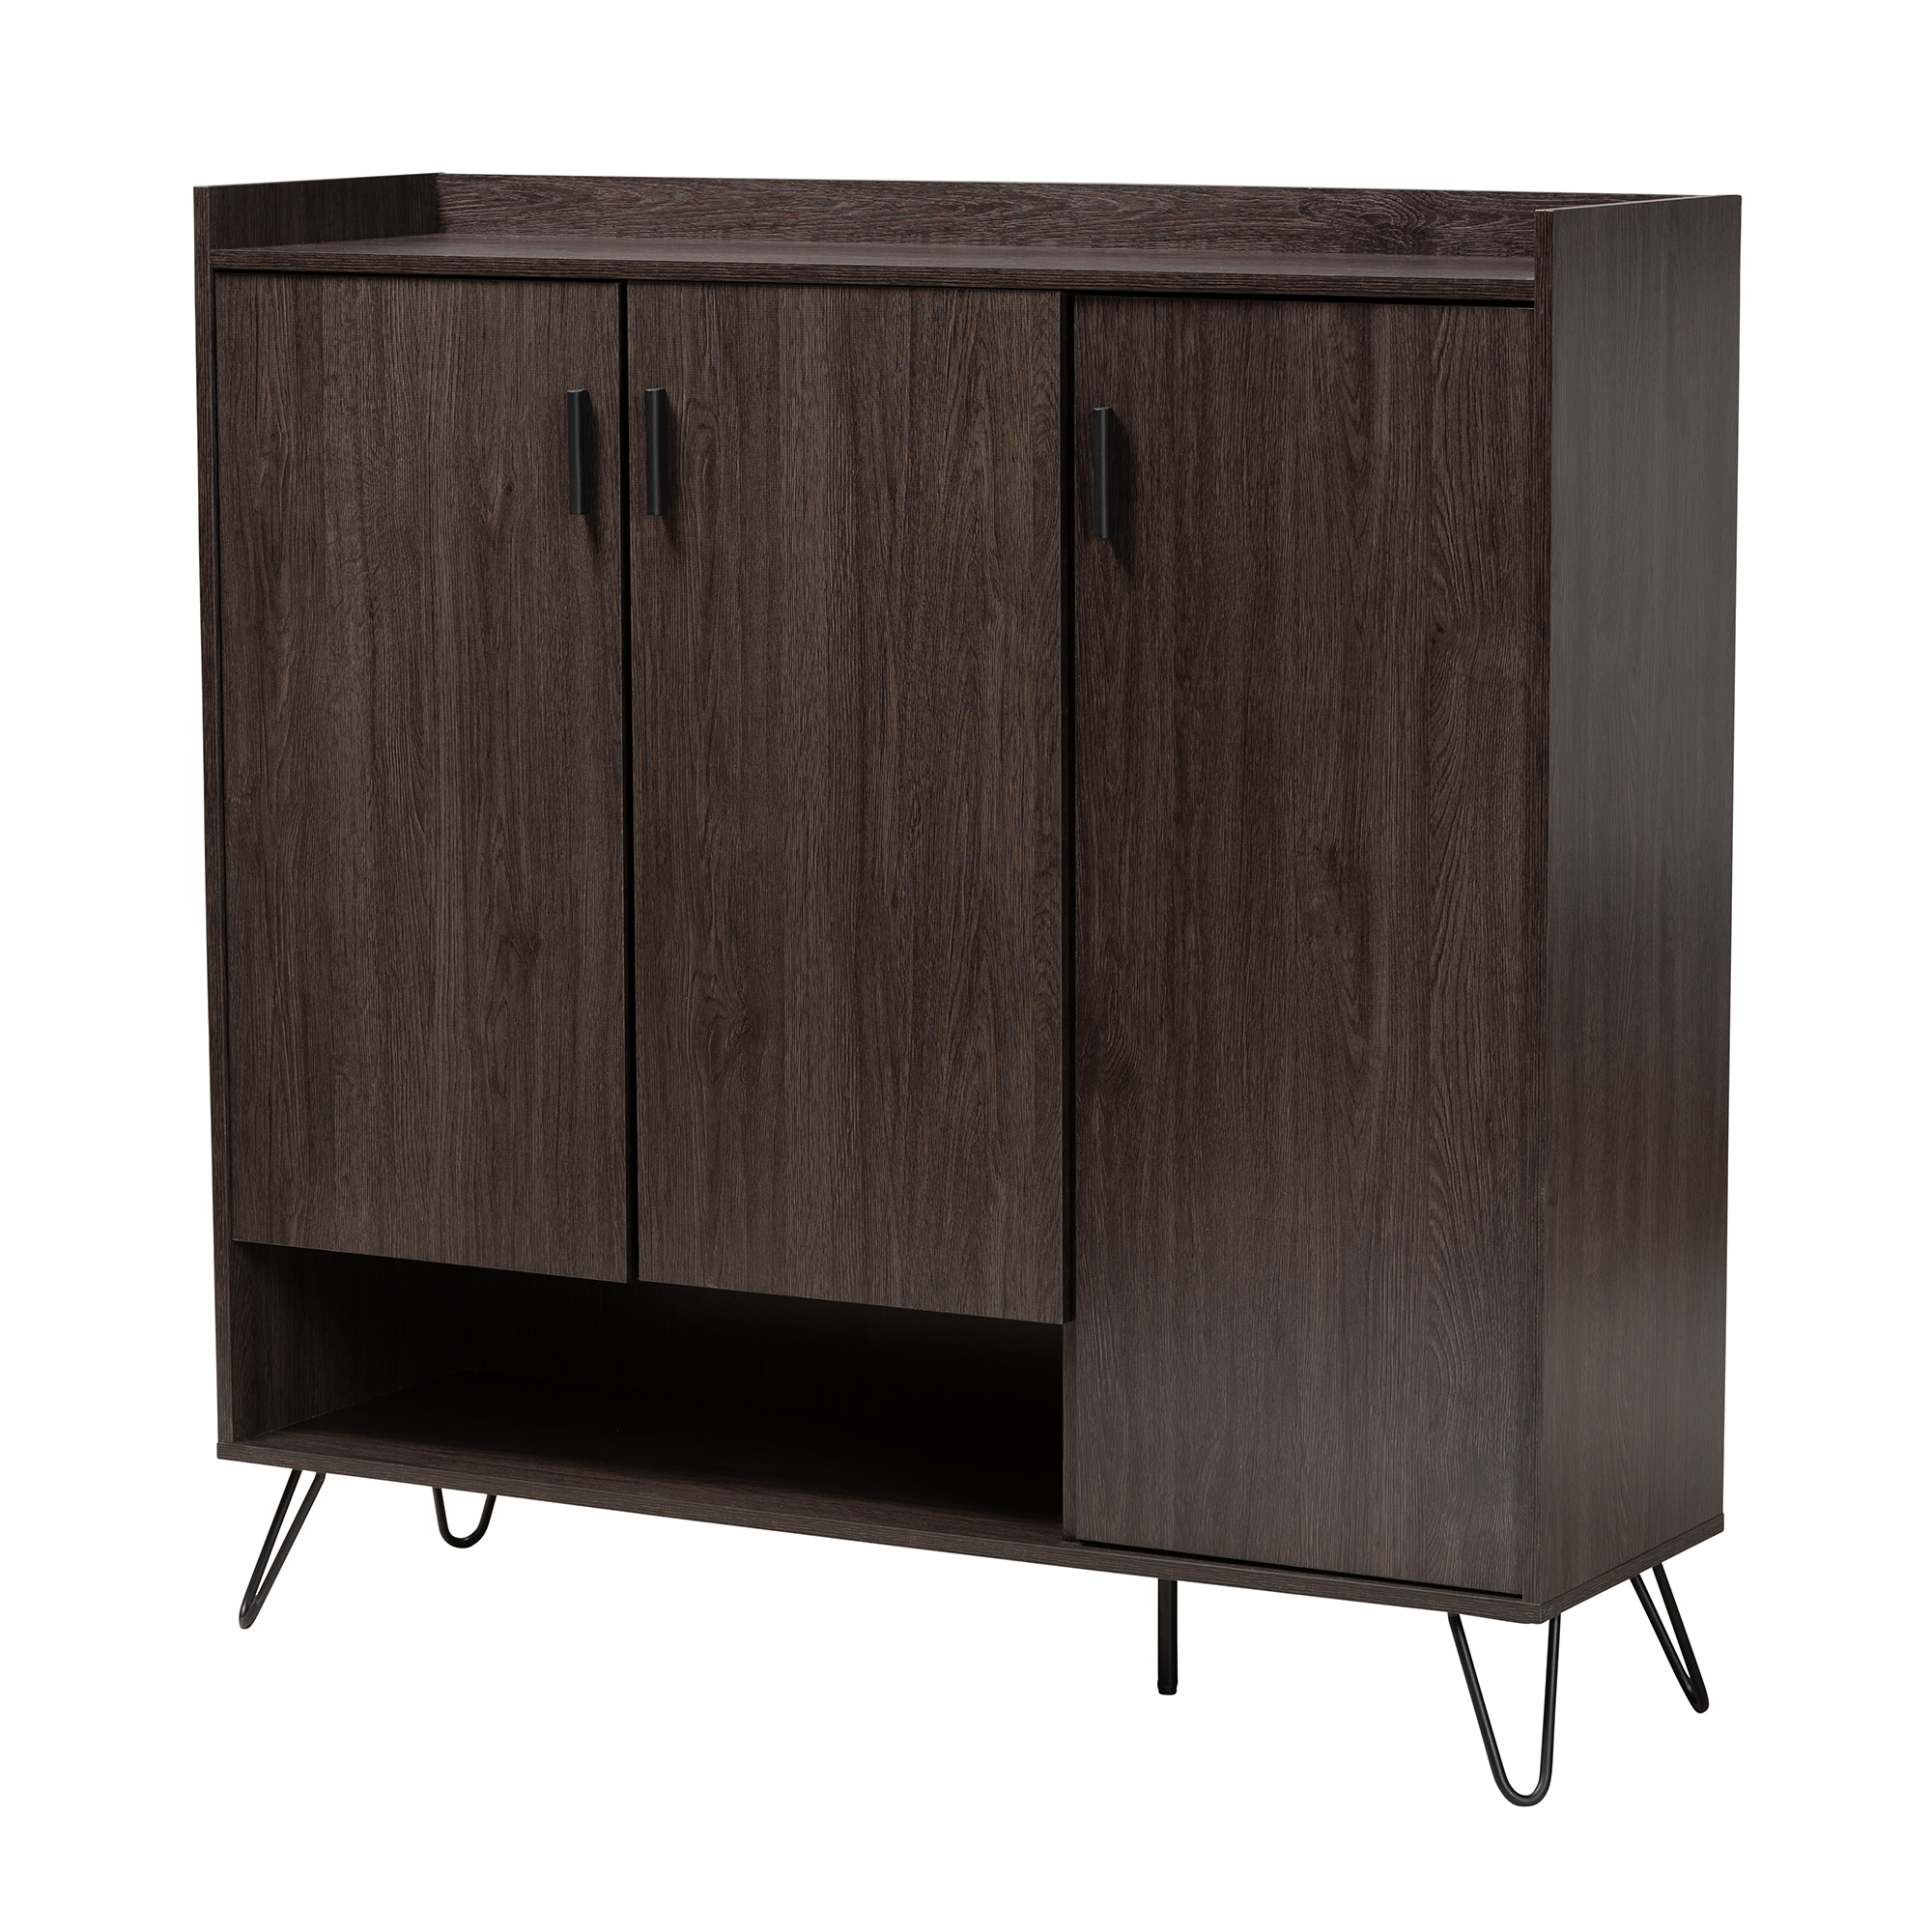 Baxton Studio Baldor Modern and Contemporary Dark Brown Finished Wood 3-Door Shoe Cabinet Affordable modern furniture in Chicago, classic living room furniture, modern storage, cheap storage